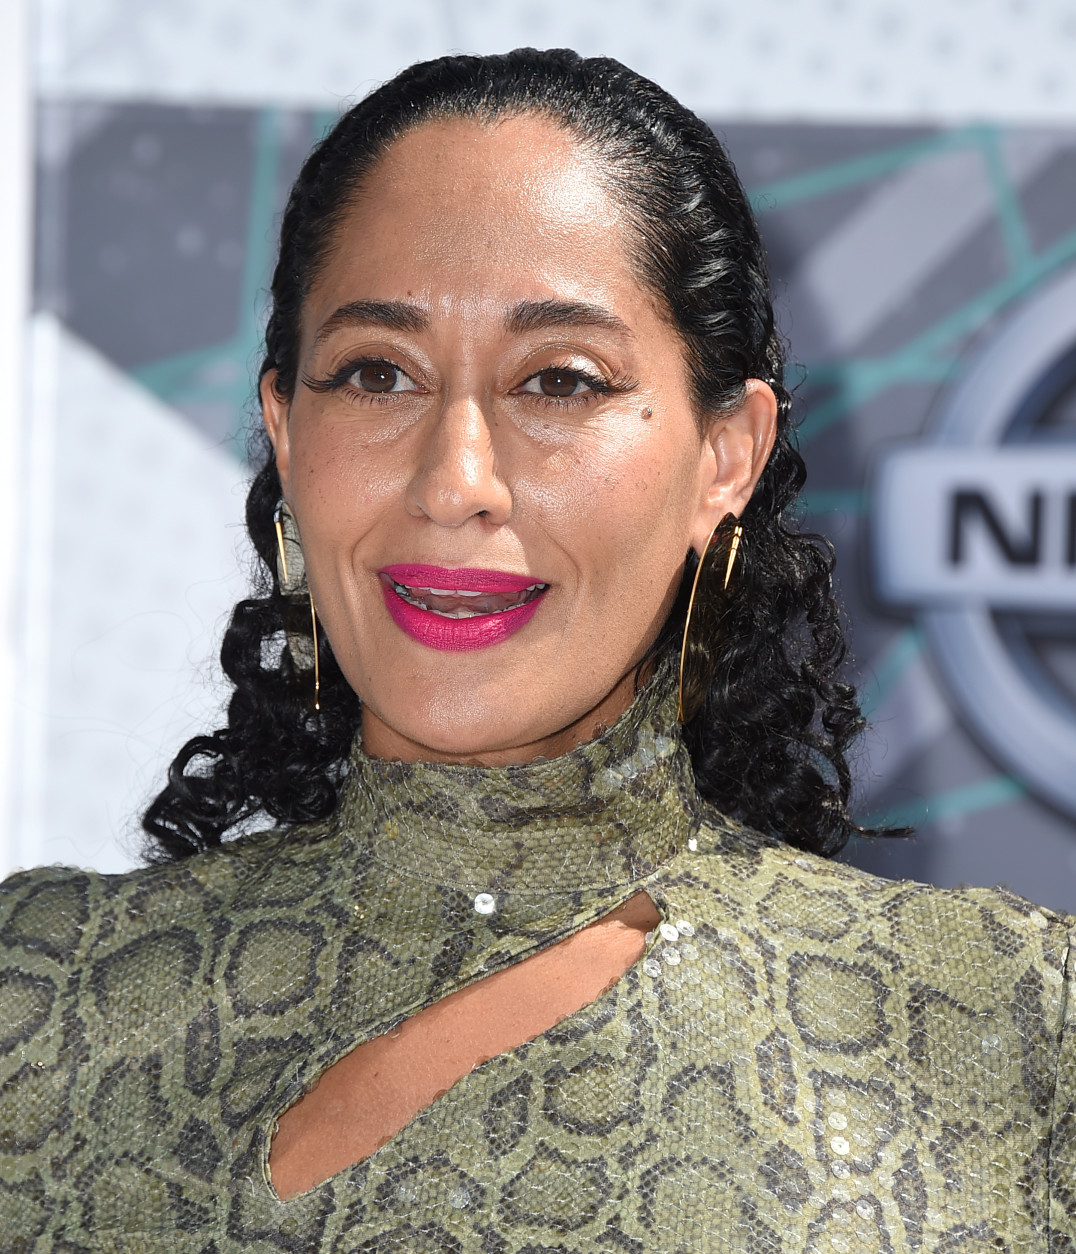 Tracee Ellis Ross arrives at the BET Awards at the Microsoft Theater on Sunday, June 26, 2016, in Los Angeles. (Photo by Jordan Strauss/Invision/AP)